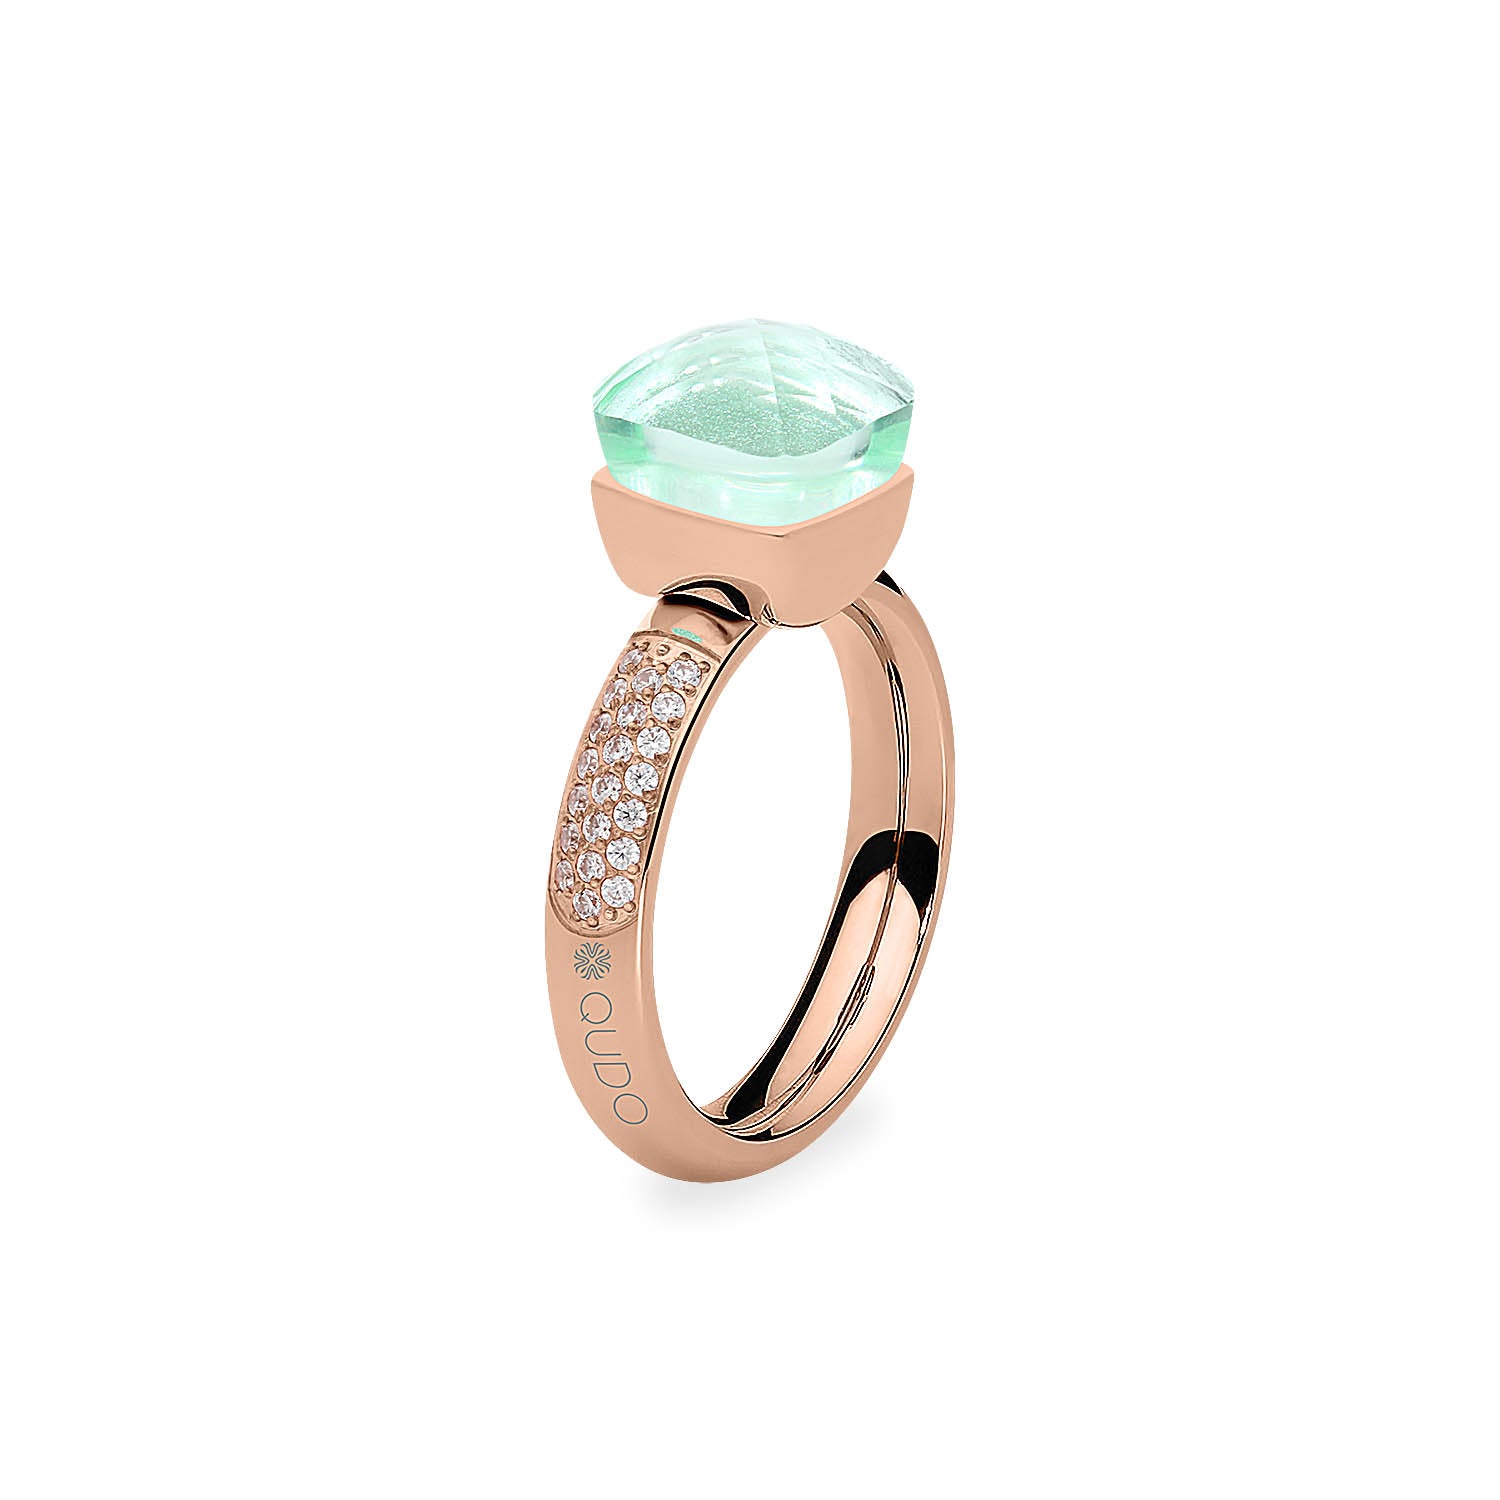 Firenze Deluxe Ring - Shades of Green & Brown - Rose Gold